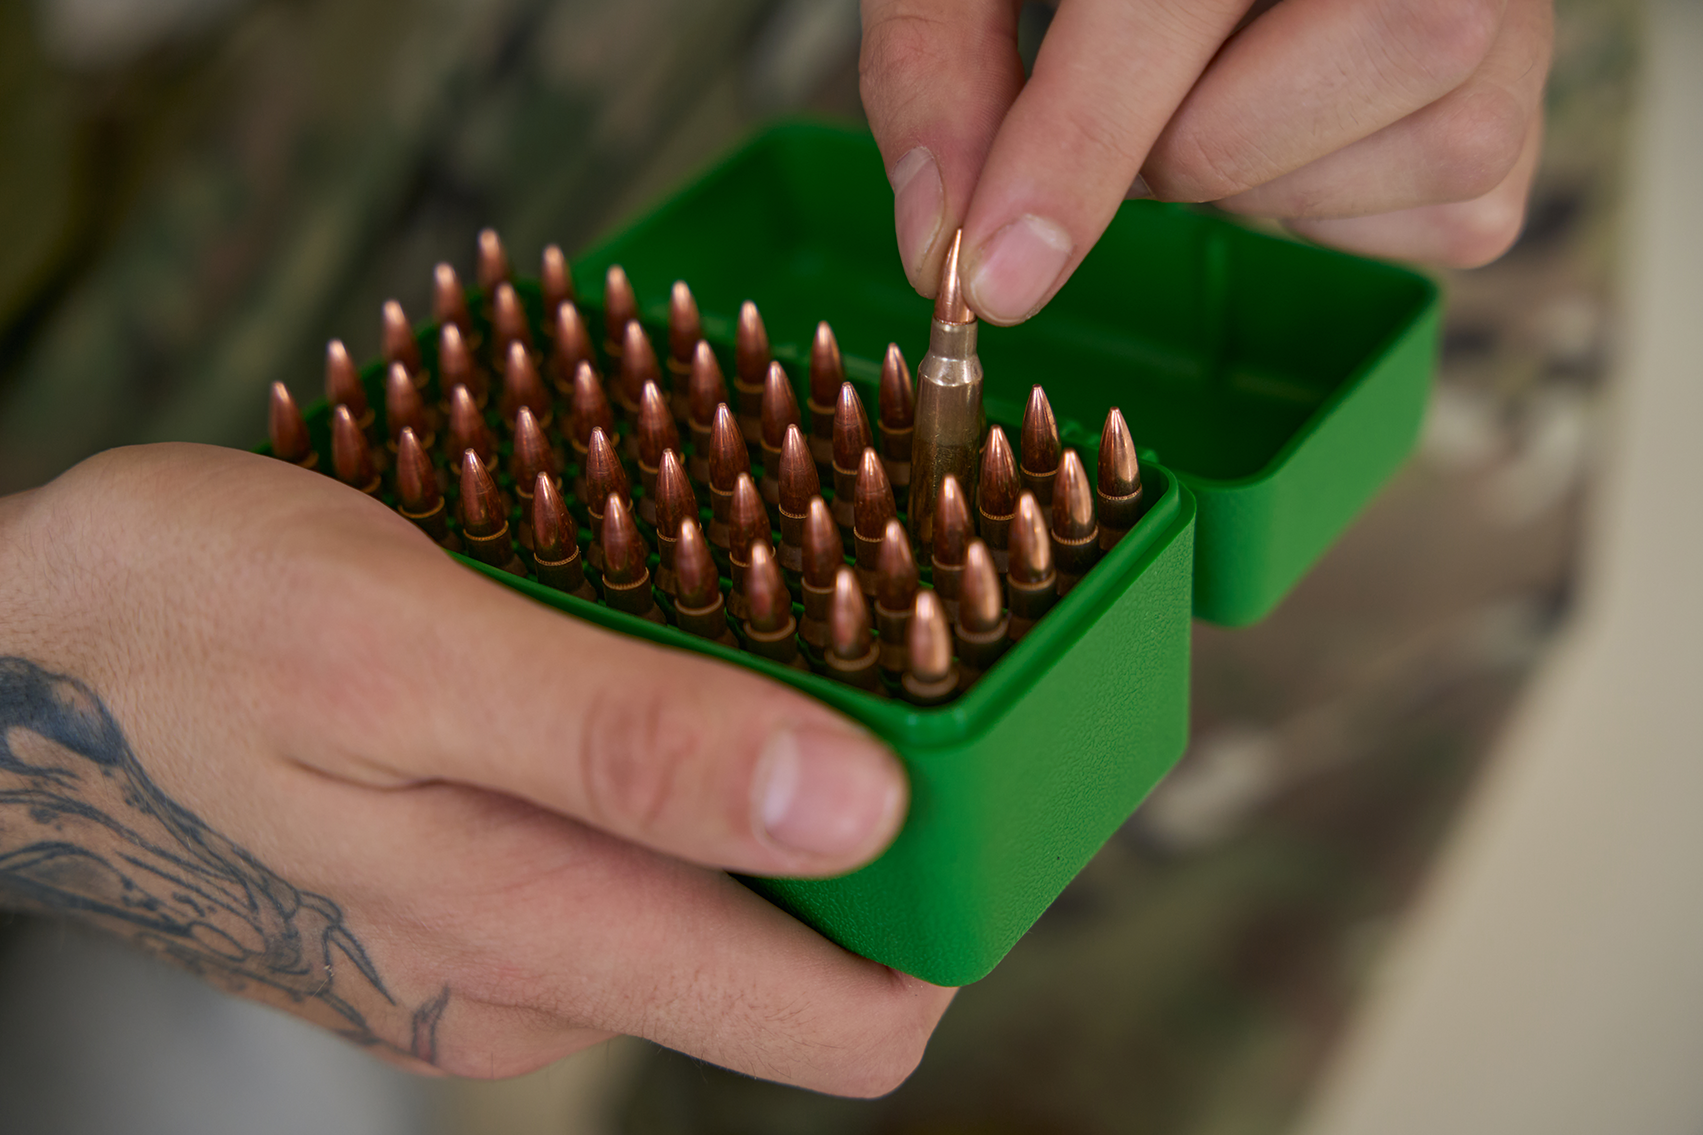 Picking bullet from box.